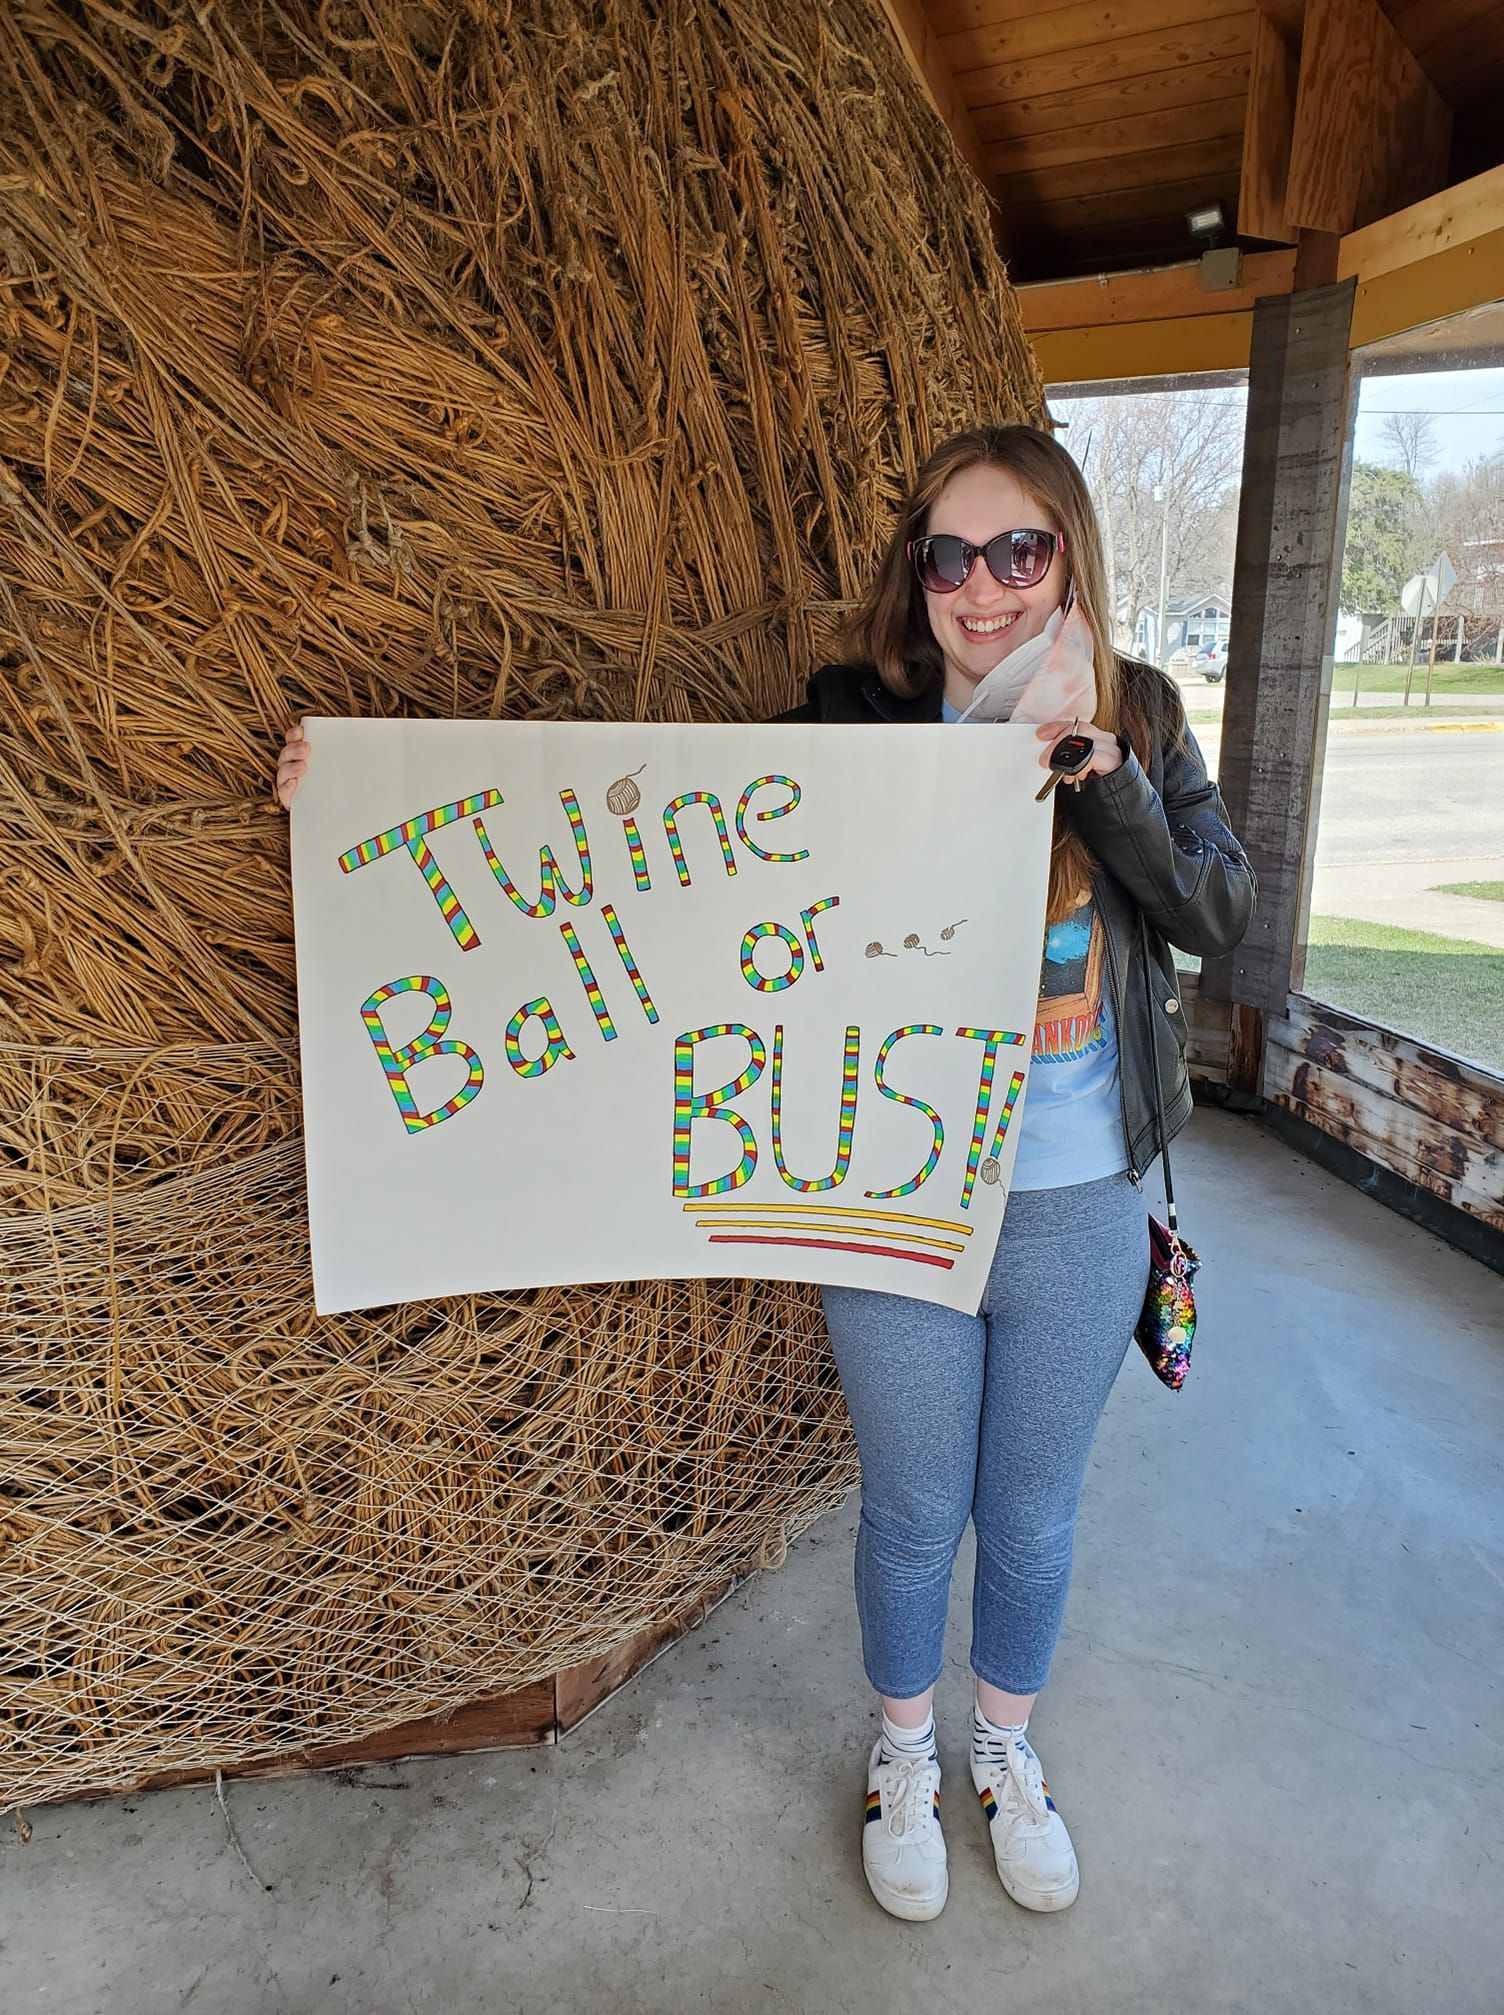 
World's Largest Ball of Twine Rolled by One Man, world record in Darwin, Minnesota
